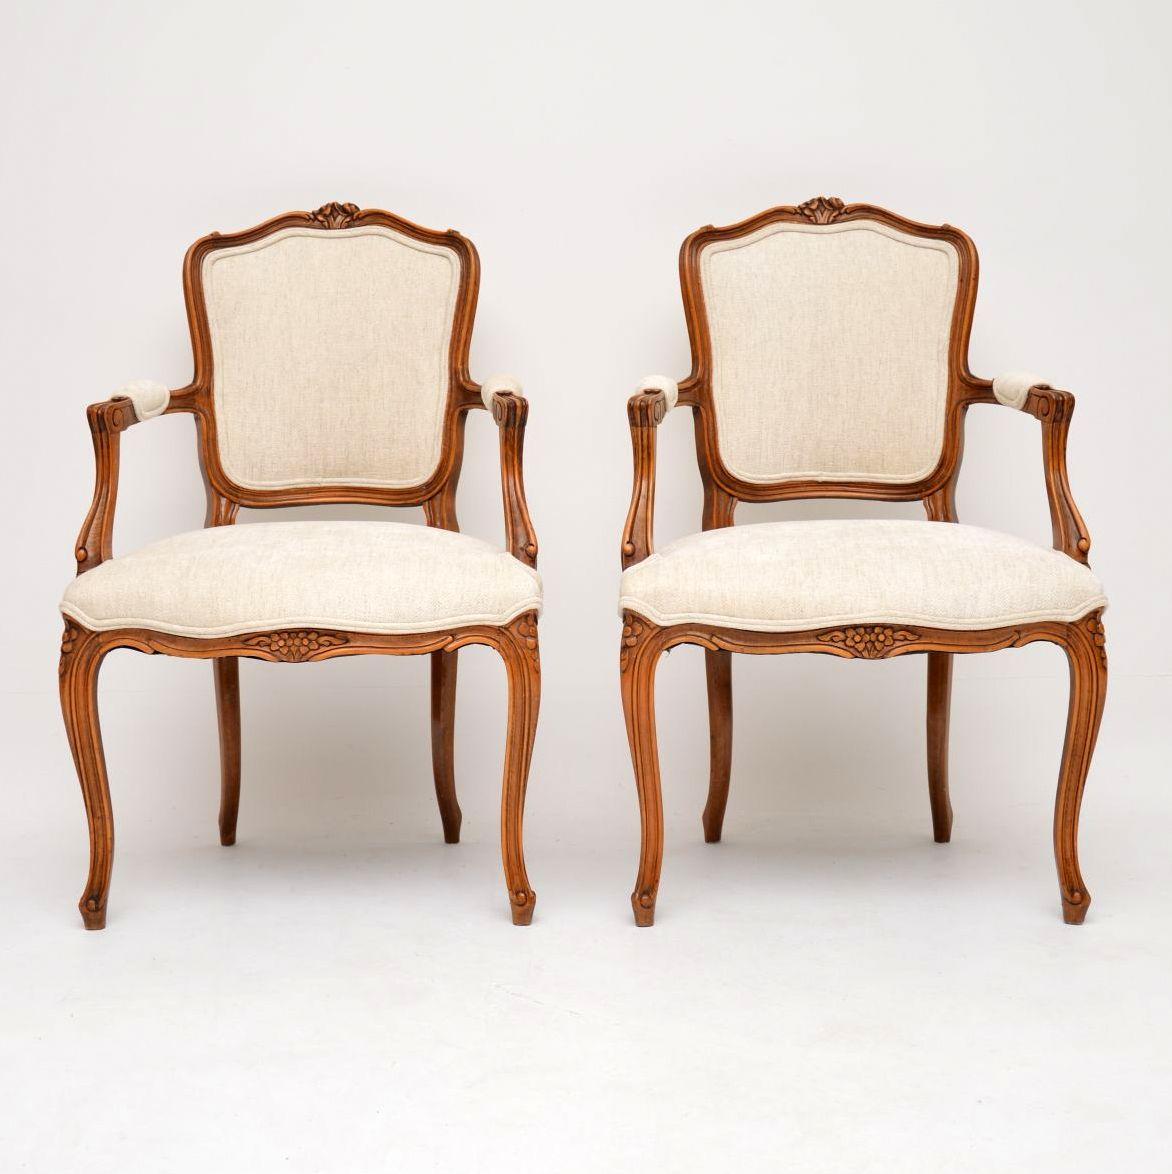 Pair of antique French walnut salon armchairs that have just been re-upholstered in our very popular cream textured fabric, with double piping. The curvaceous walnut frames have good carvings all over & they are structurally sound too. These